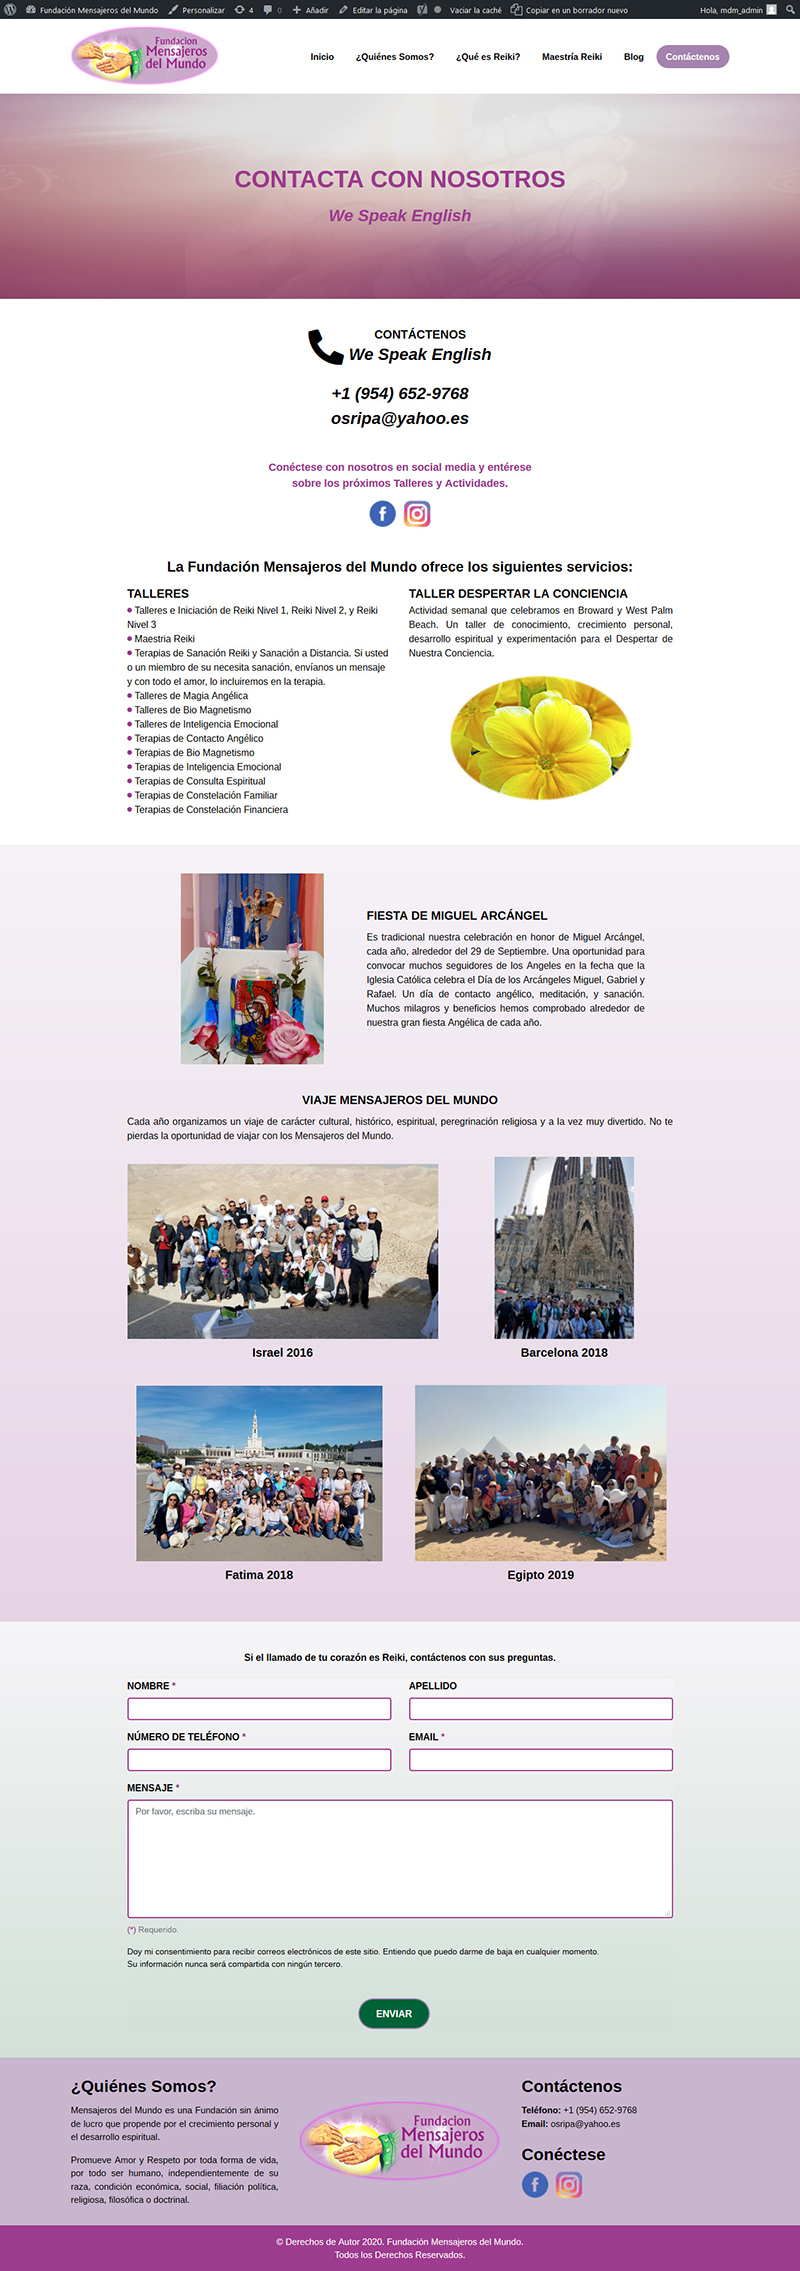 Website "Mensajeros del Mundo": Page "Contact Us" viewed on large-screen devices.